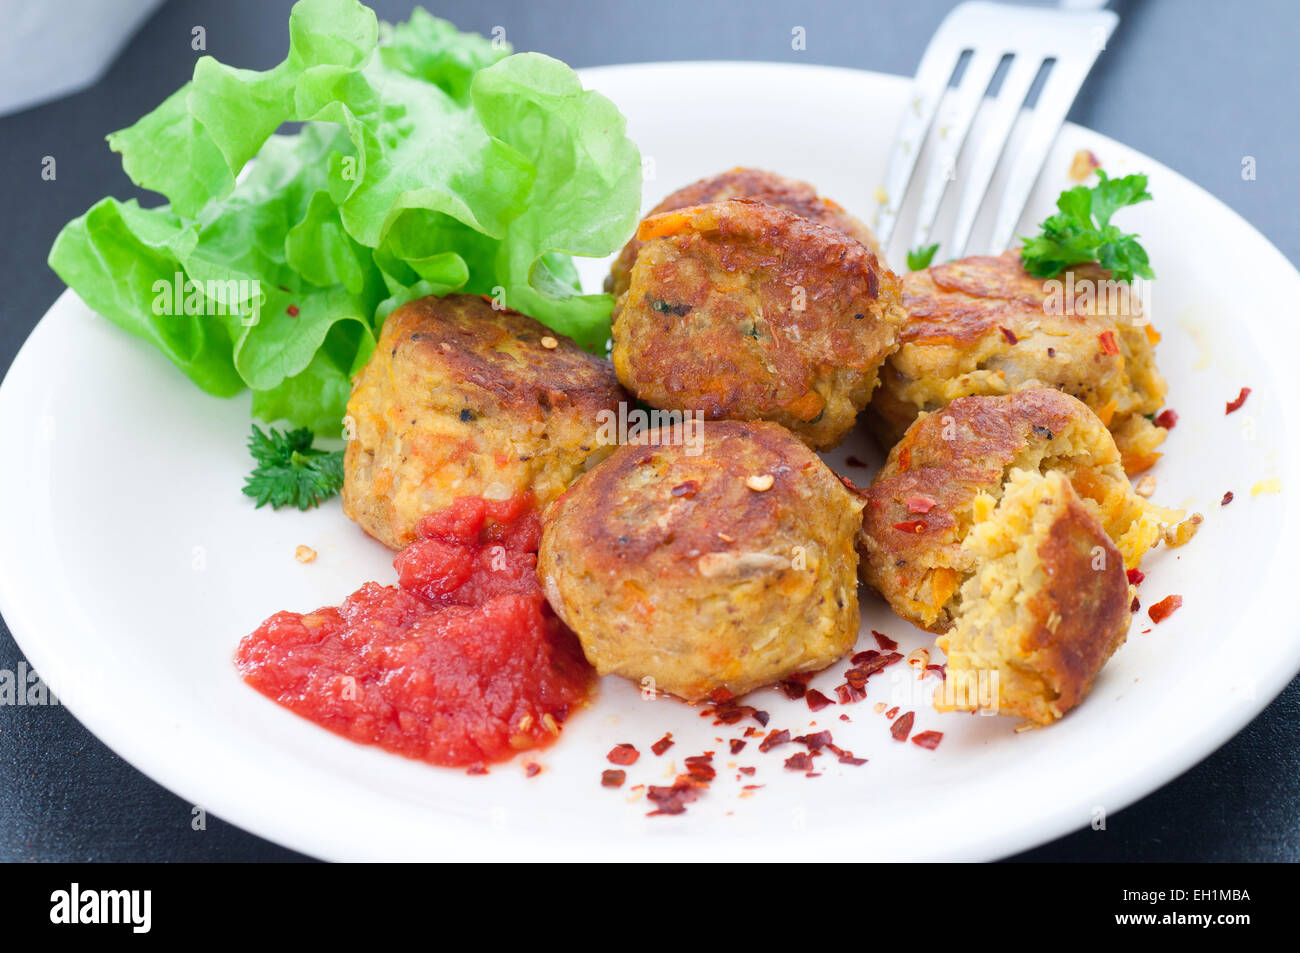 Turmeric and chili spiced veggie balls served with tomato and chili sauce. Stock Photo